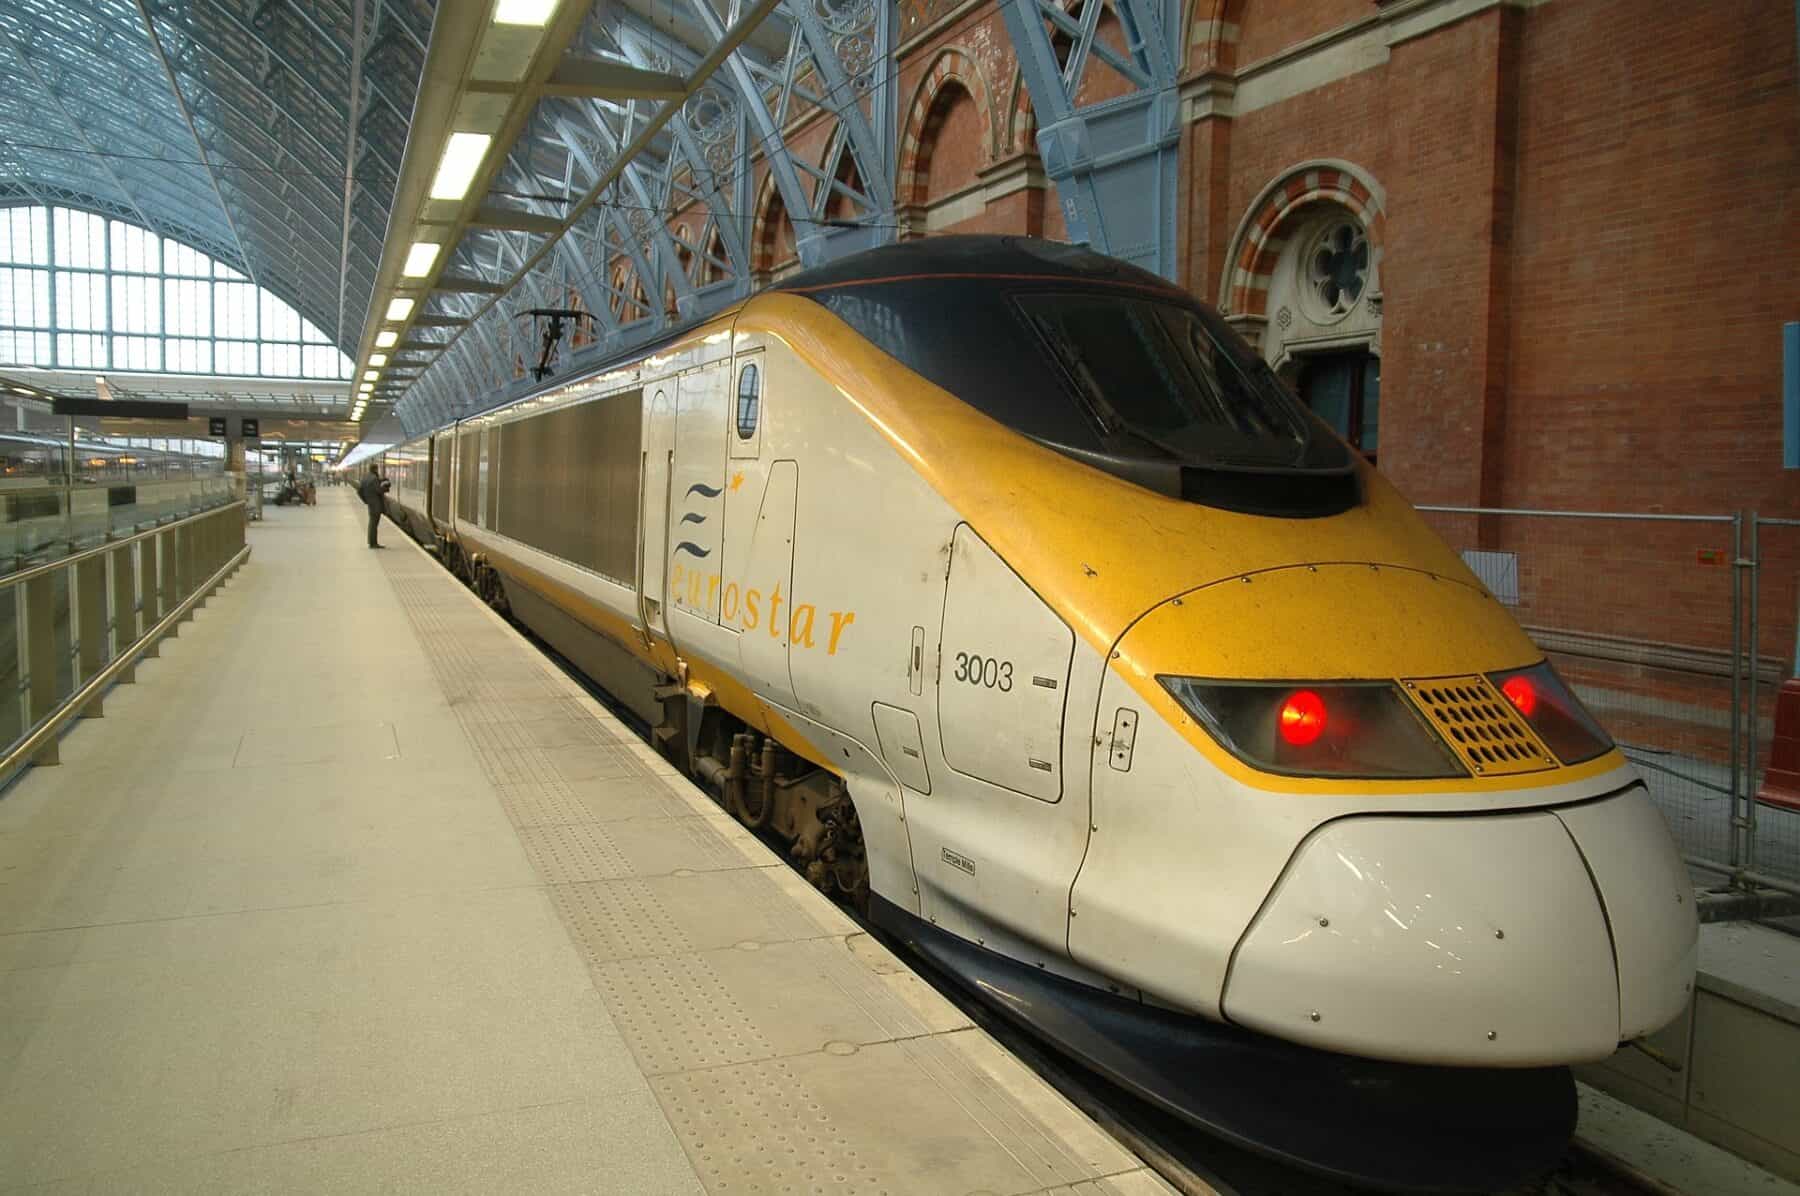 The Eurostar train at St. Pancras Station. Image source: Pixabay user theo-choi.